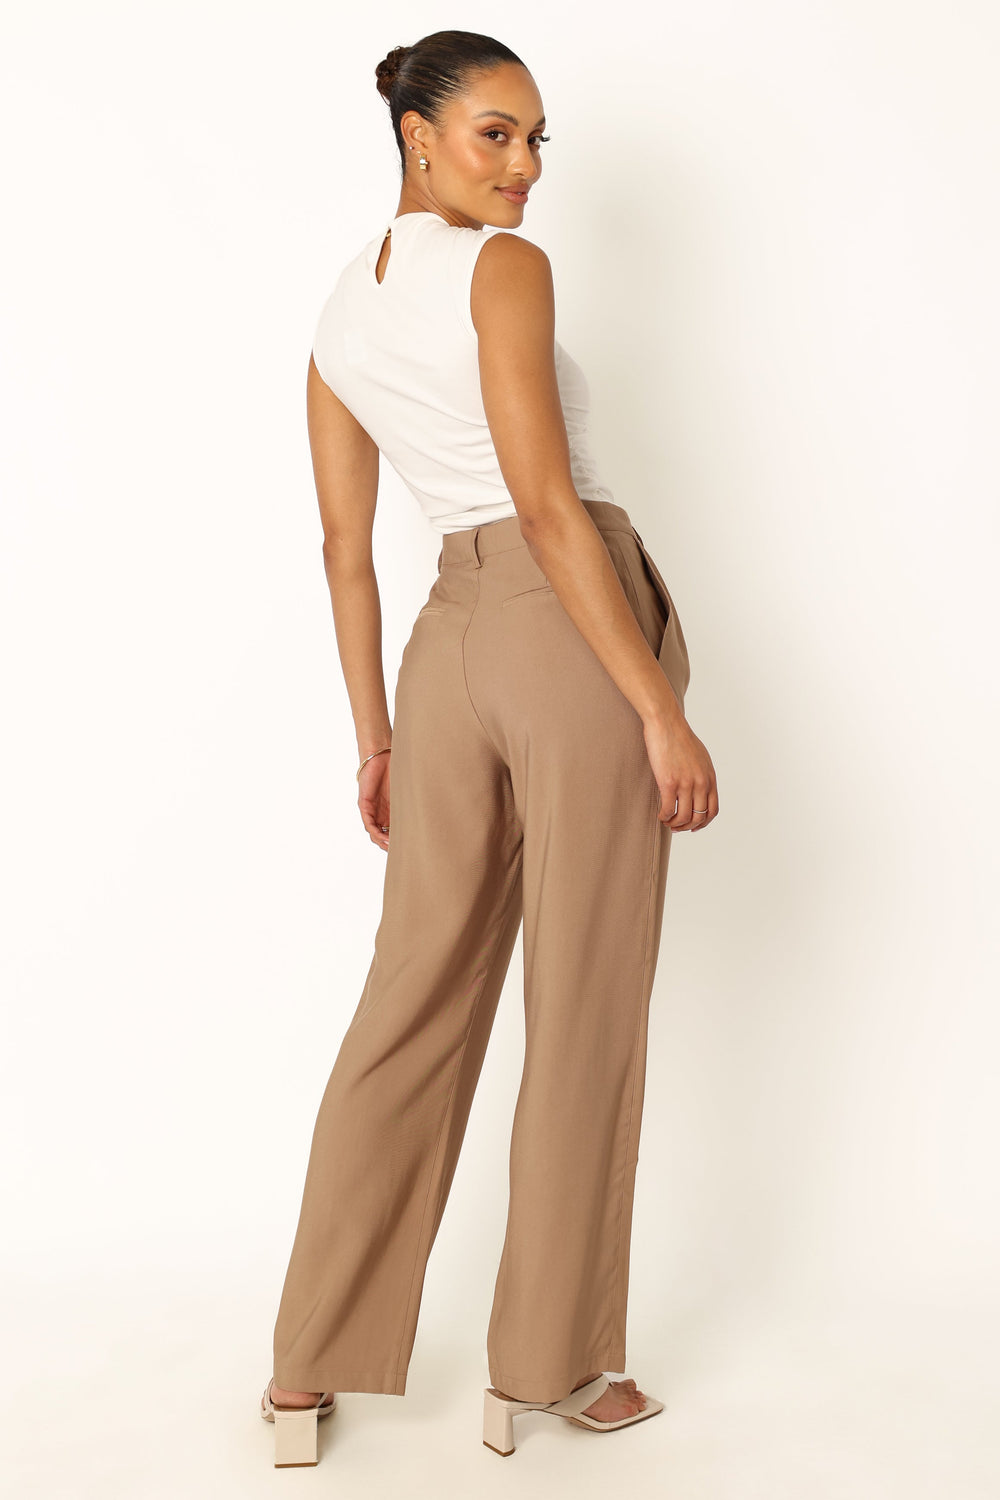 Petal and Pup USA BOTTOMS Noelle Pant - Light Brown